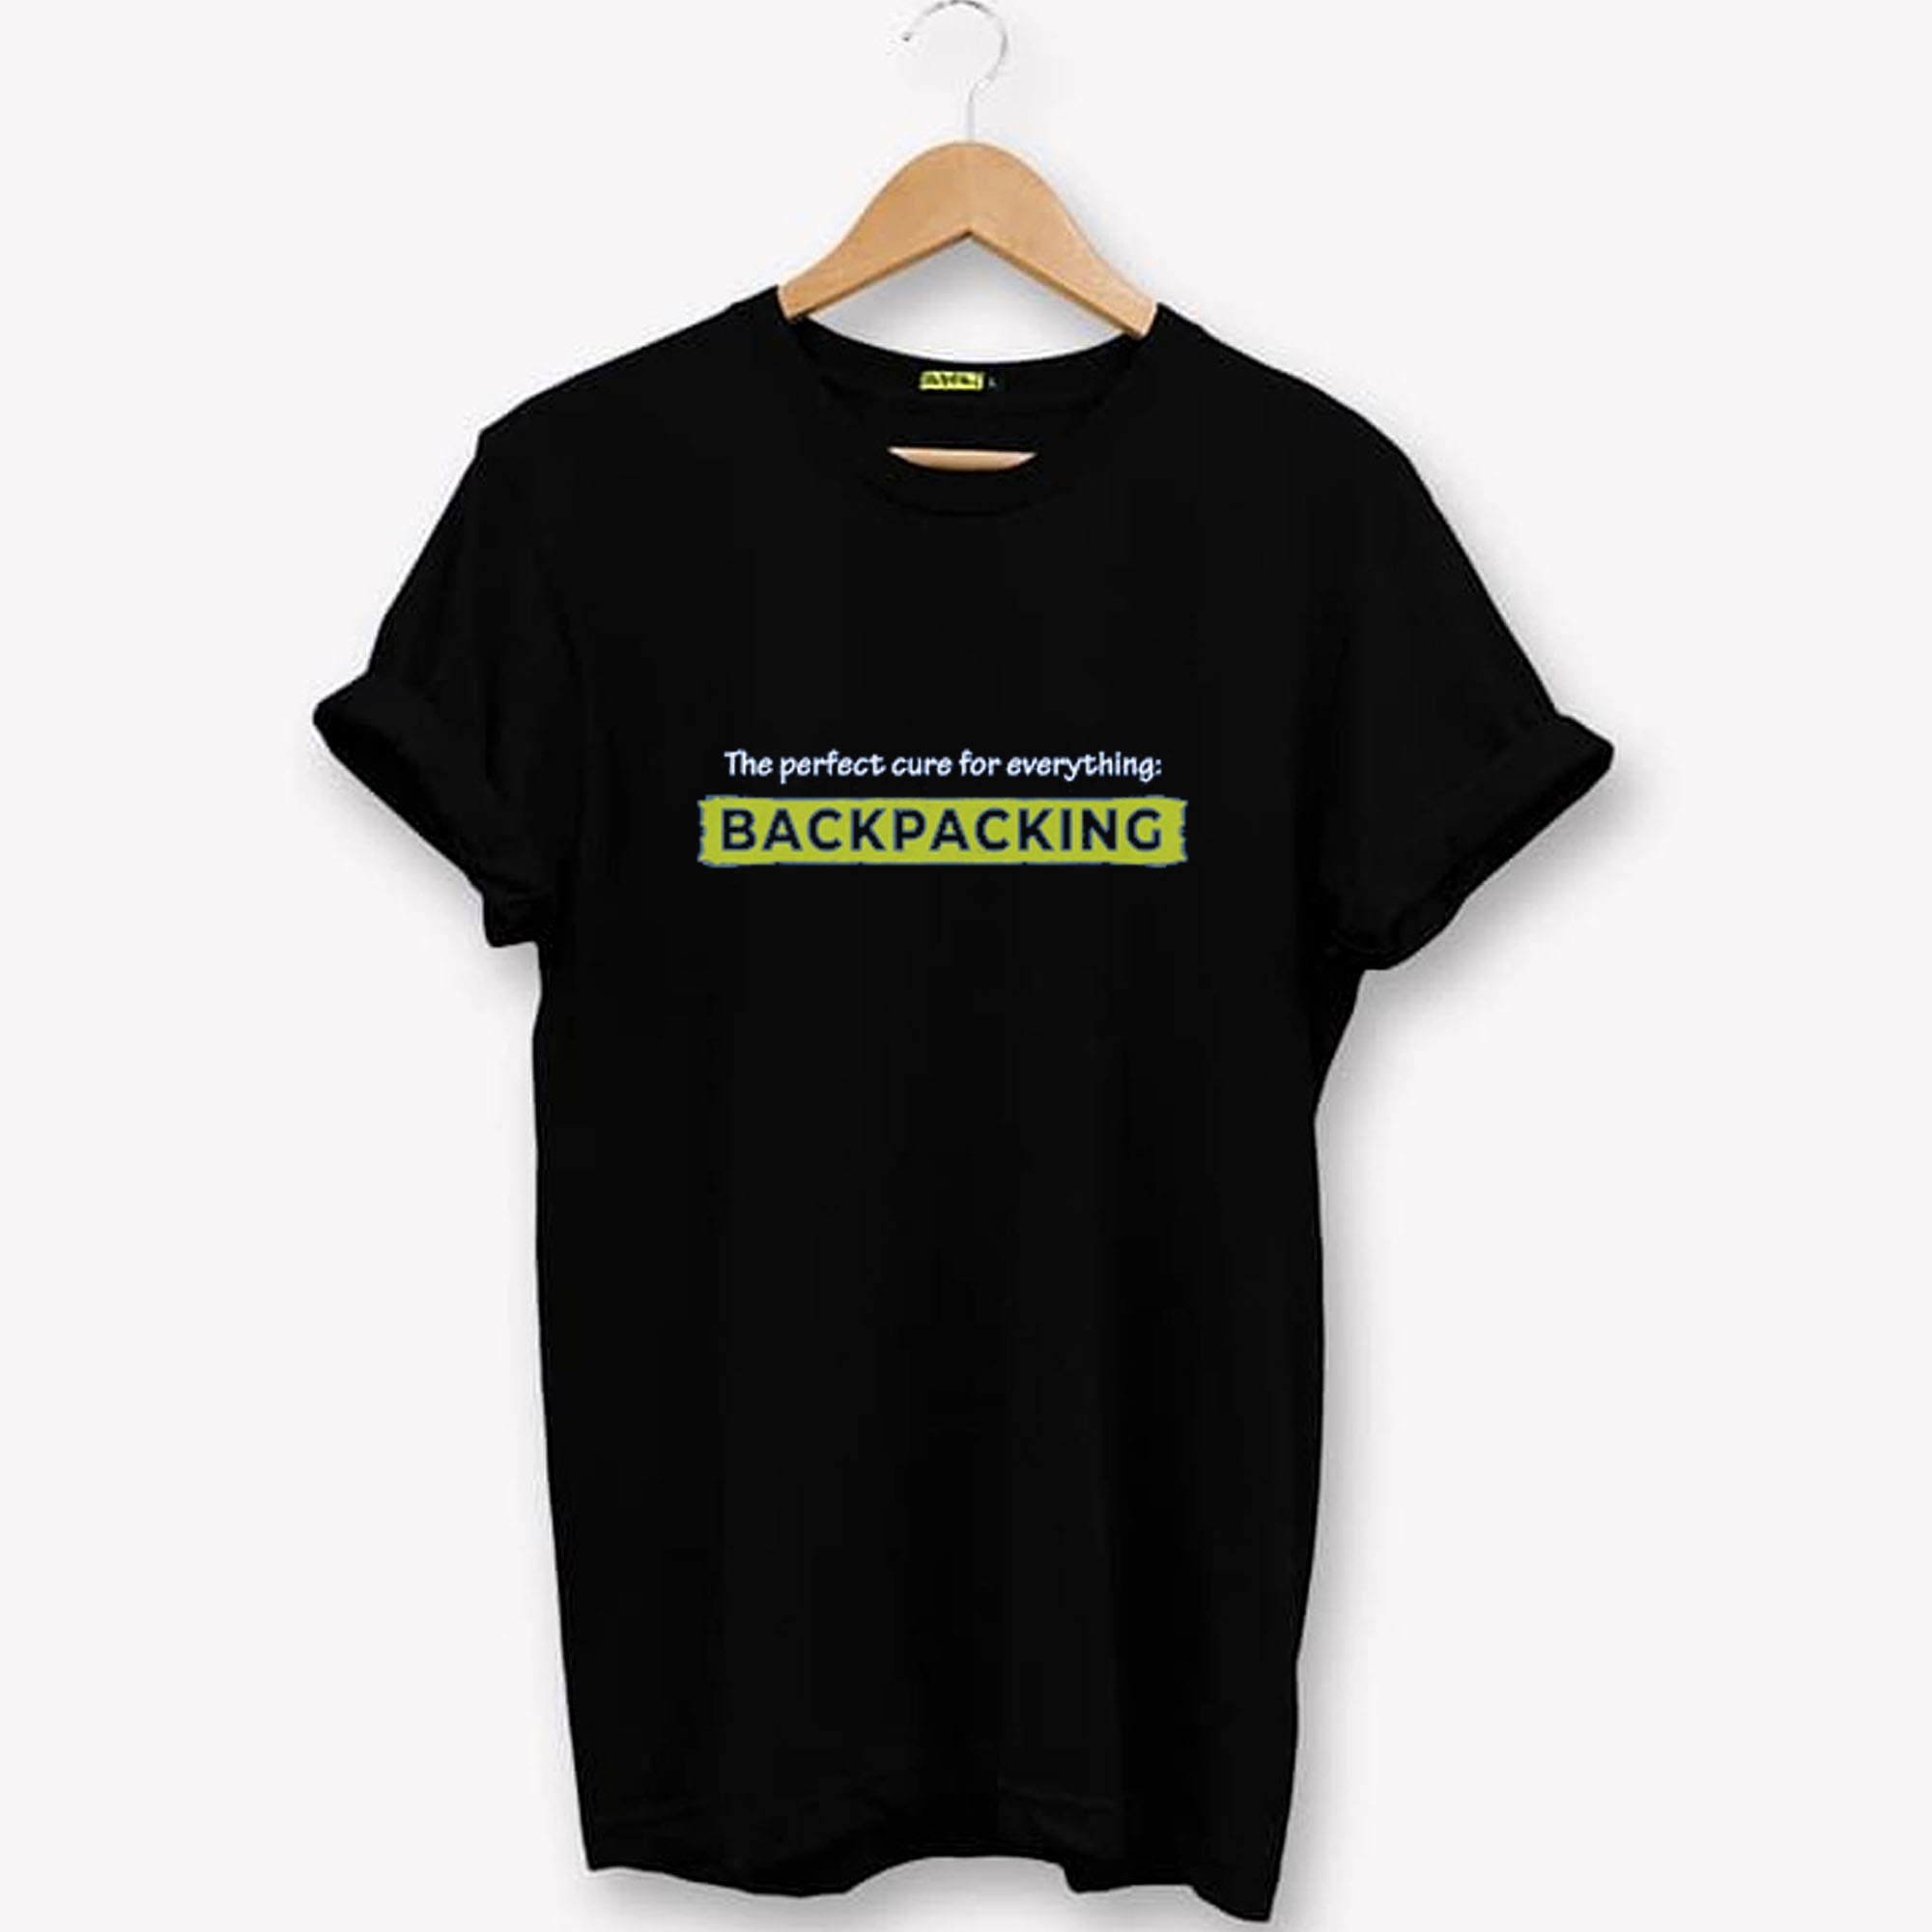 Looking for the perfect cure T-Shirt